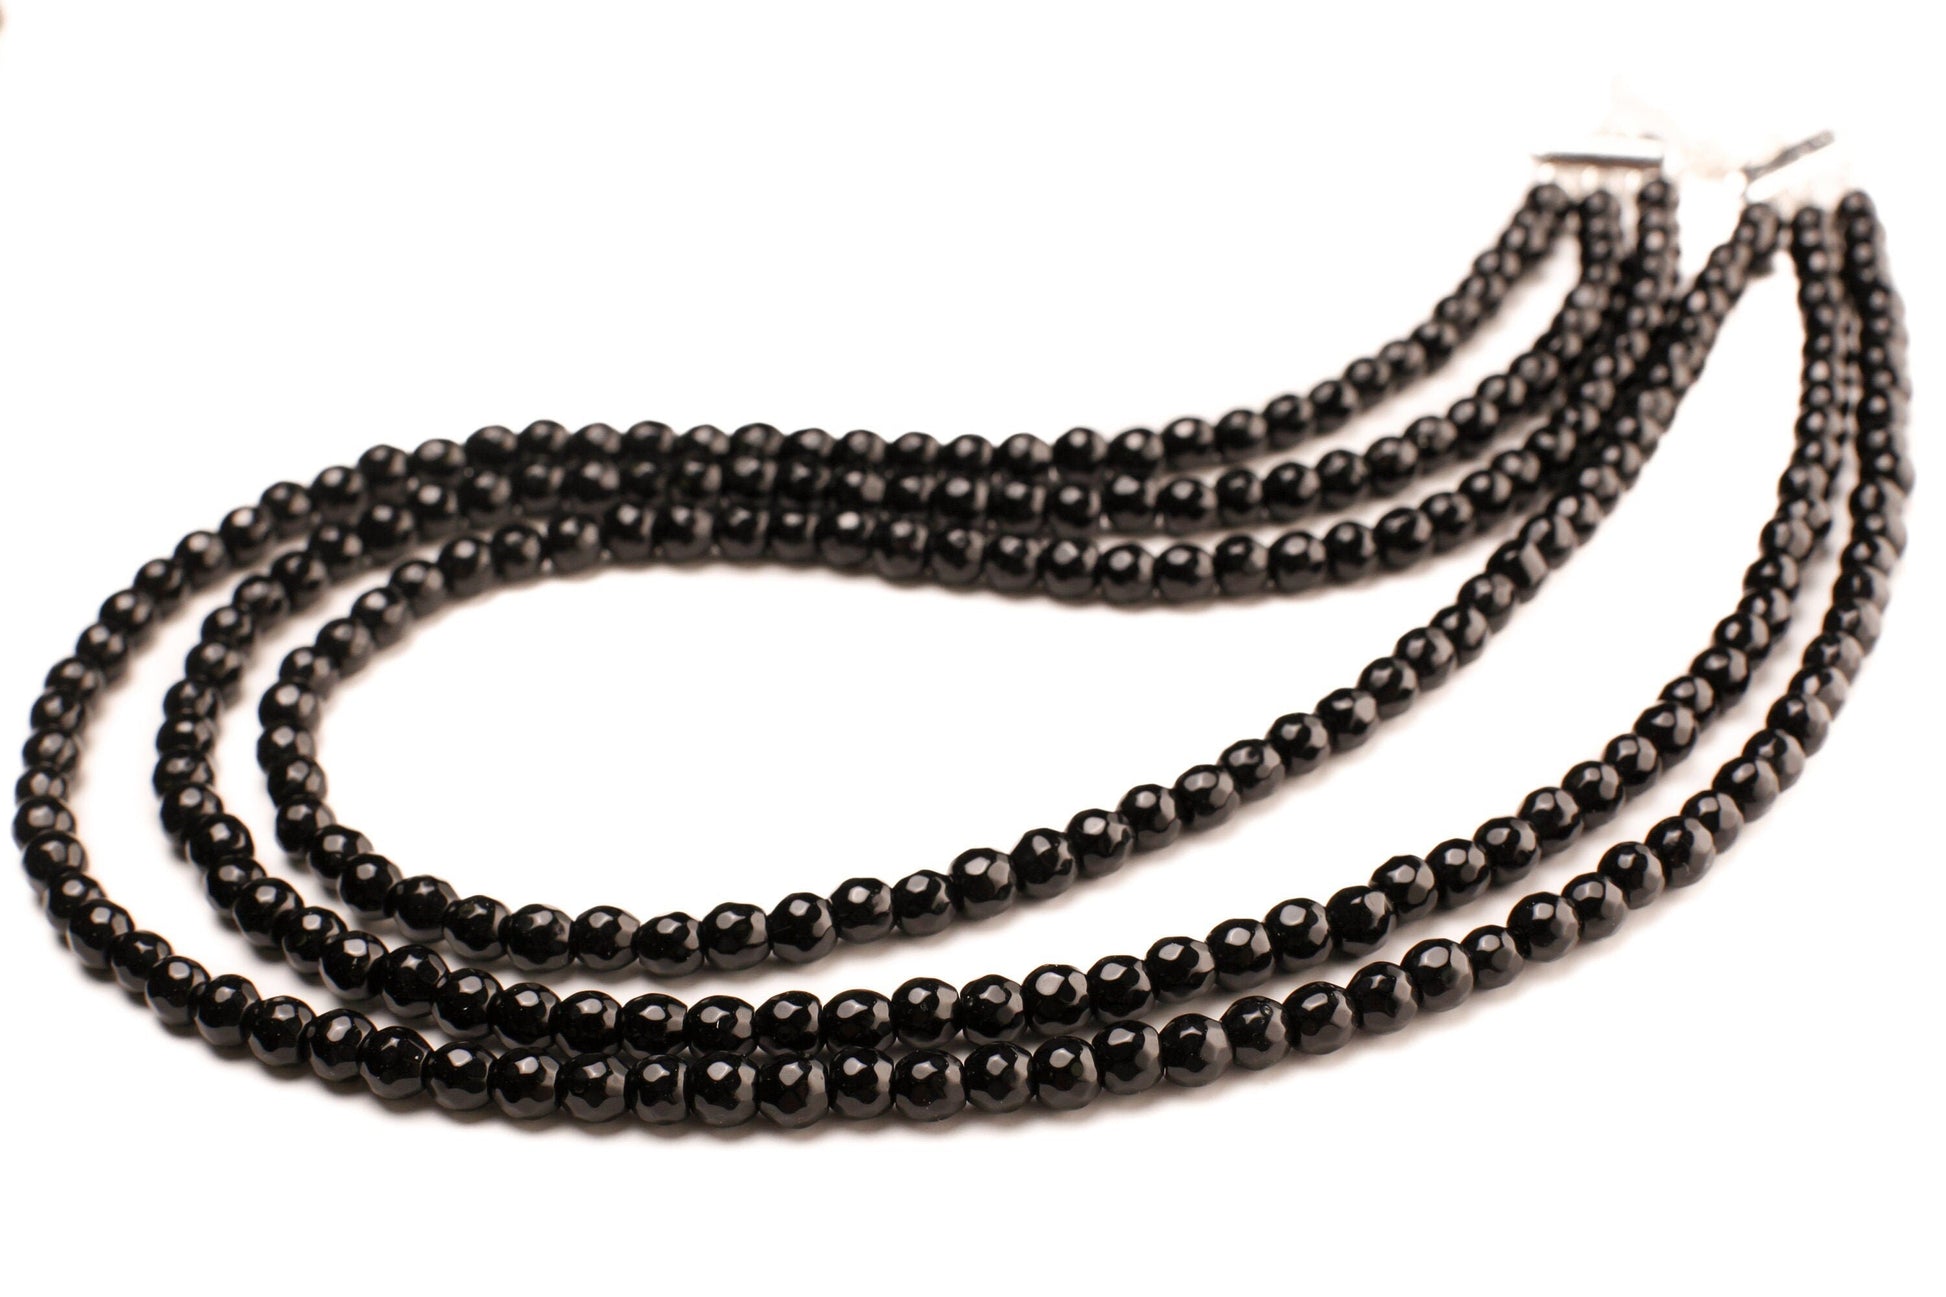 Black Onyx 6mm Faceted round 3 Line Adjustable Necklace, Natural Black Onyx Gemstone Black Beads 18.5&quot; Layering Necklace with 2&quot; Extender